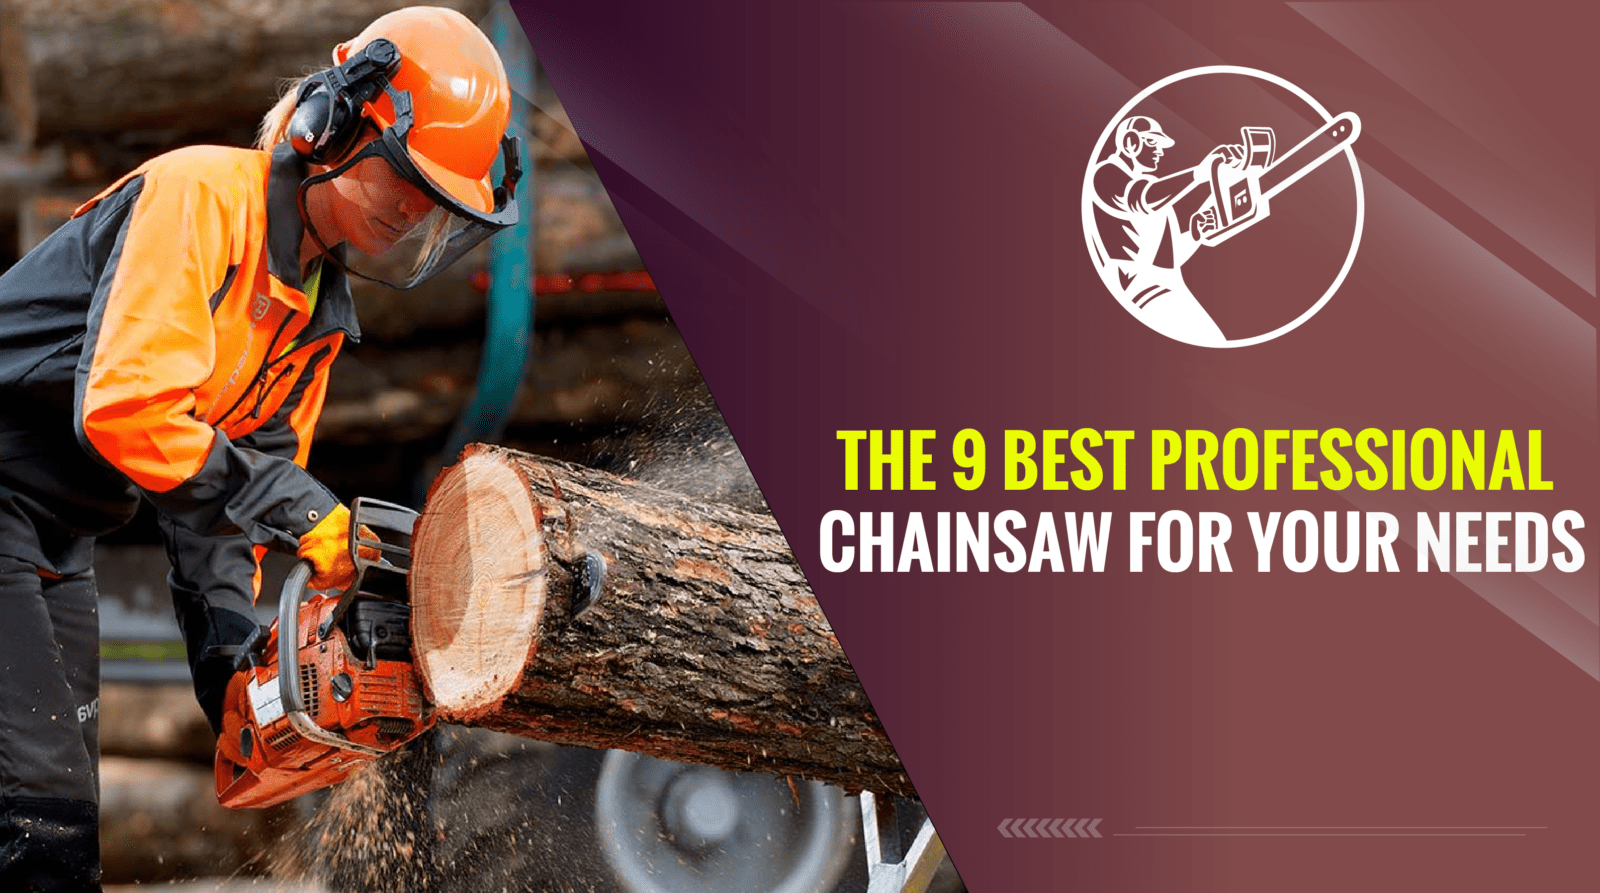 The 9 Best Professional Chainsaw for Your Needs